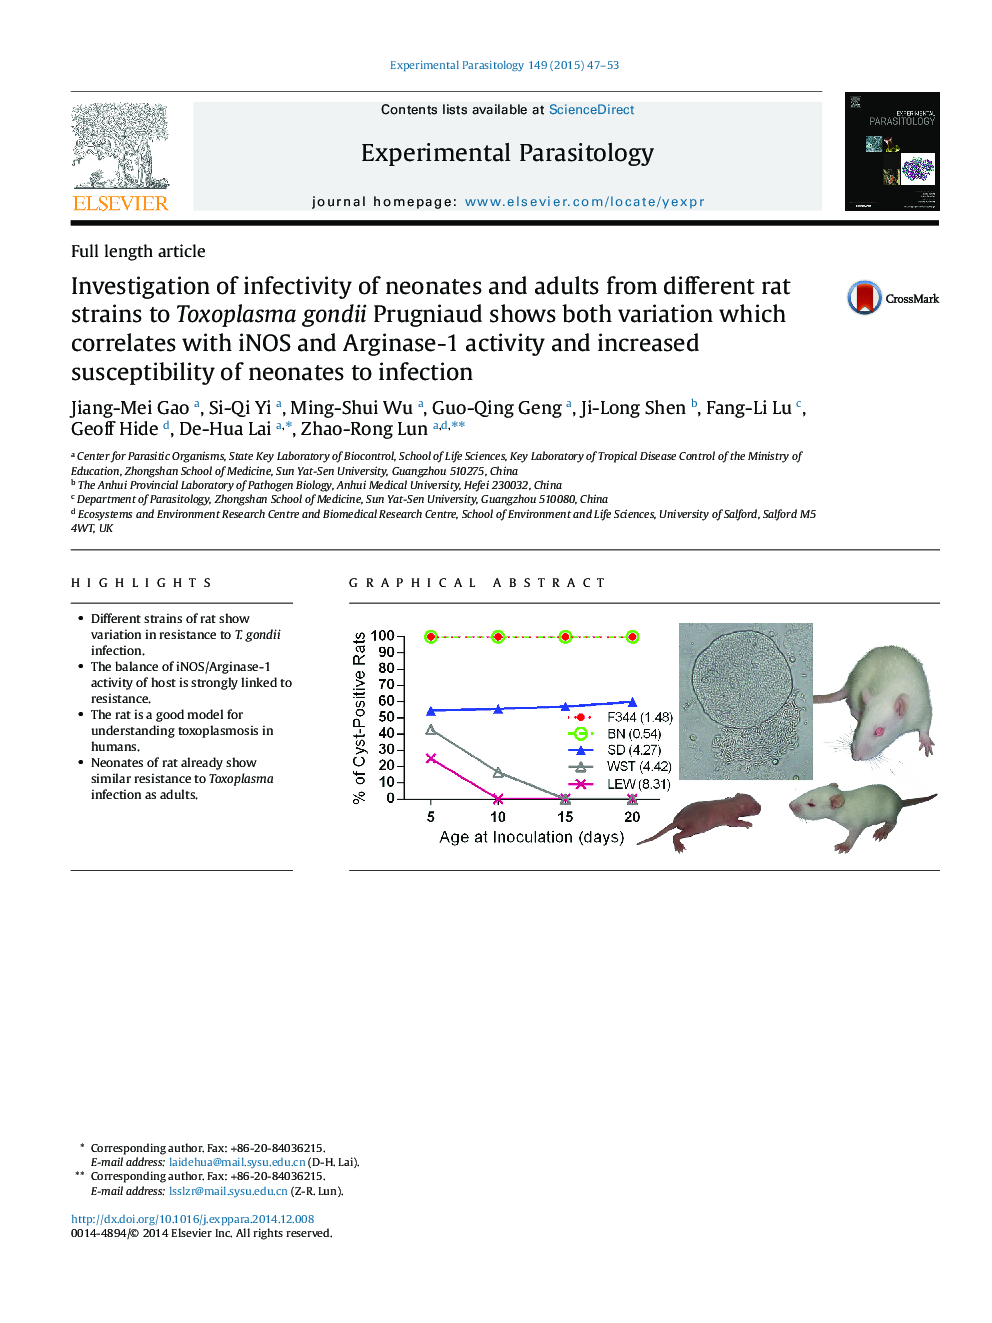 Investigation of infectivity of neonates and adults from different rat strains to Toxoplasma gondii Prugniaud shows both variation which correlates with iNOS and Arginase-1 activity and increased susceptibility of neonates to infection